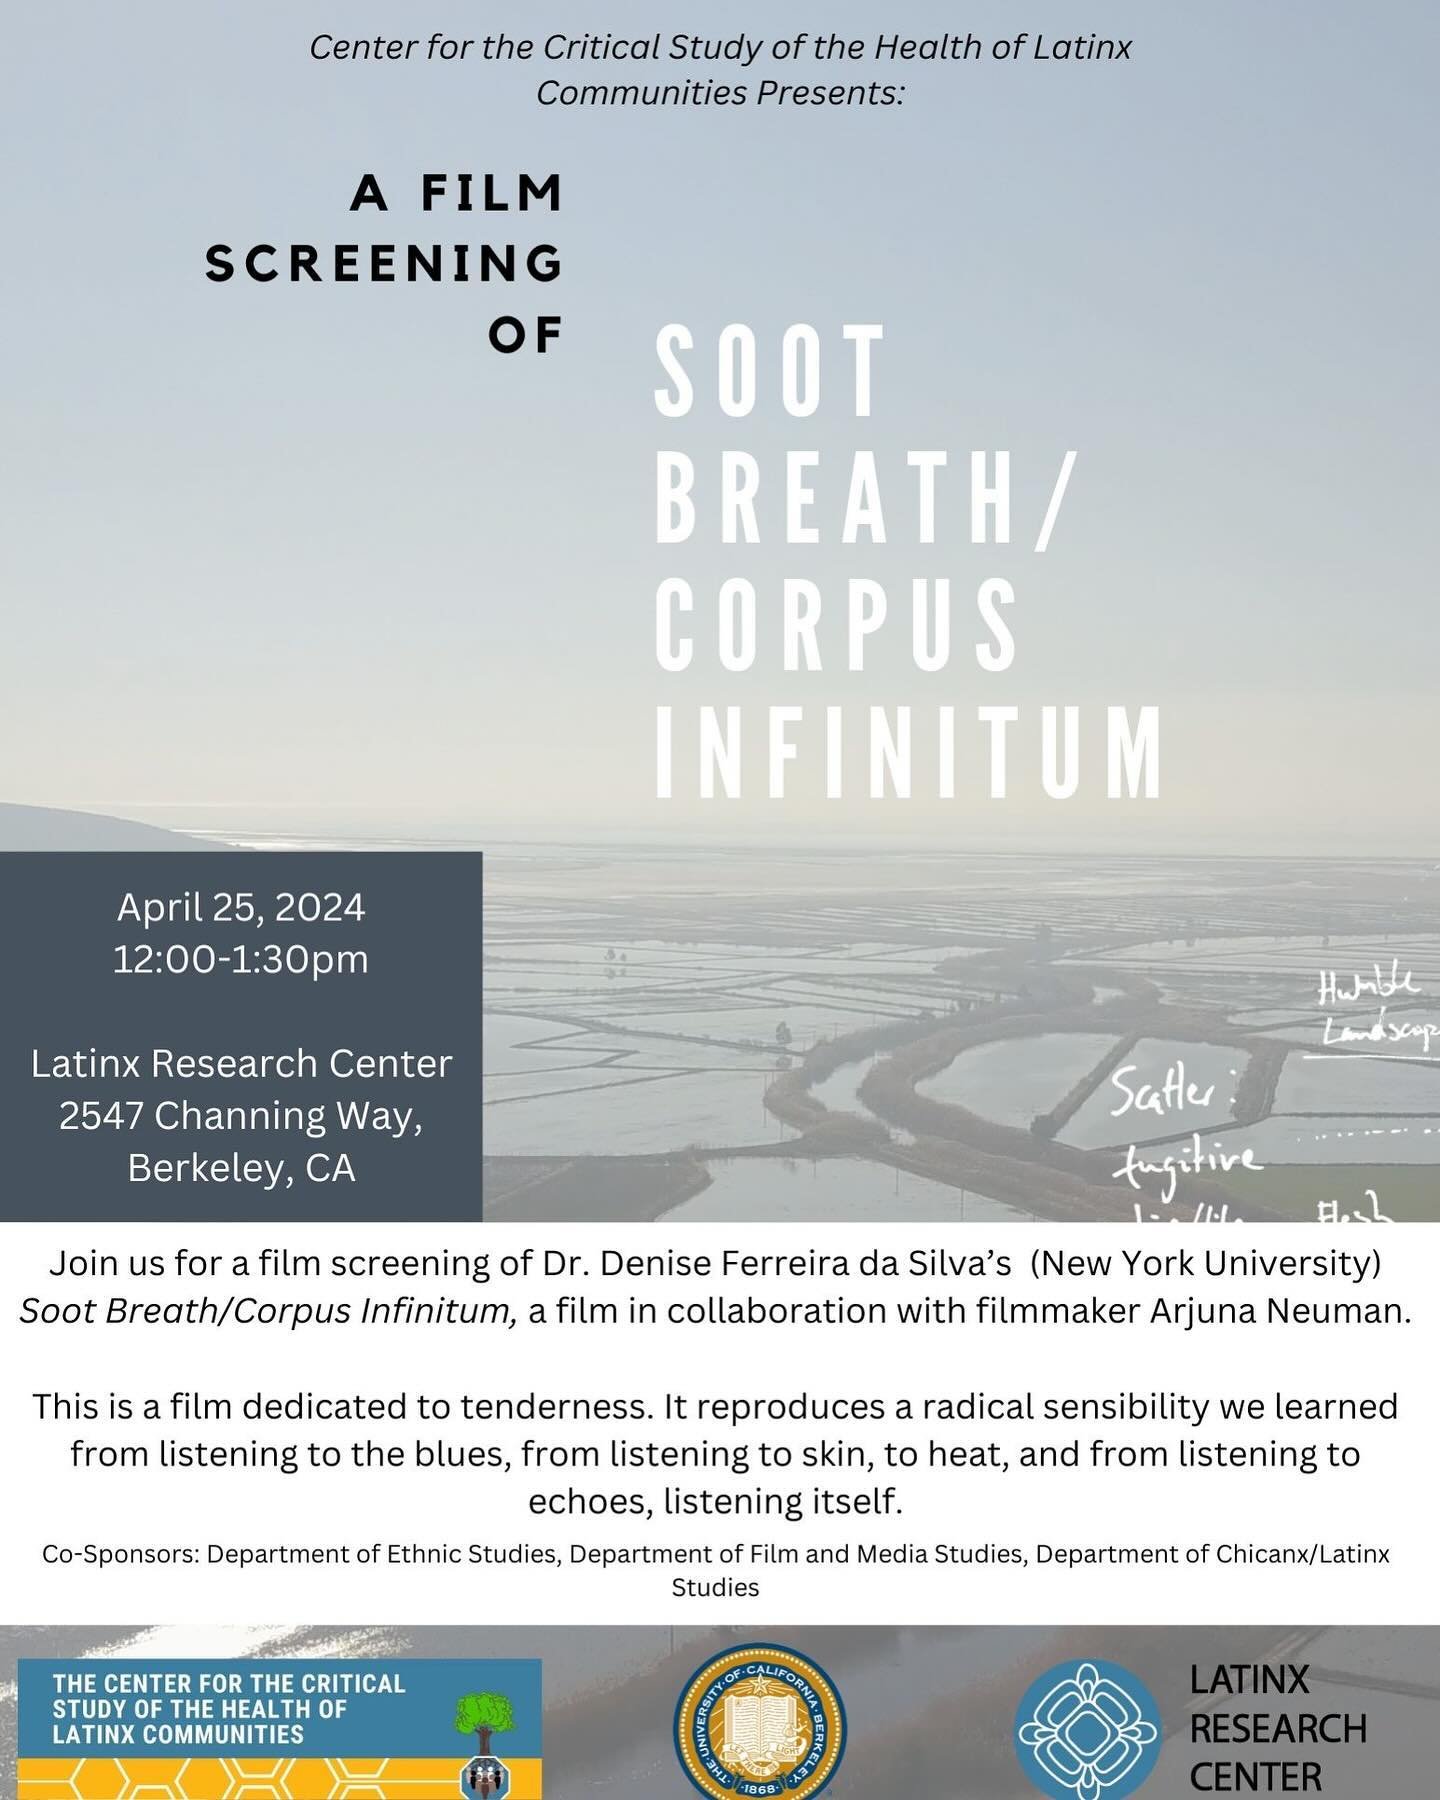 Join us for a film screening of Professor Denise Ferreira da Silva&rsquo;s film Soot Breath/Corpus Infinitum, a collaboration with filmmaker Arjuna Neuman. Soot Breath/Corpus Infinitum is a film dedicated to tenderness. It explores the nexus of envir